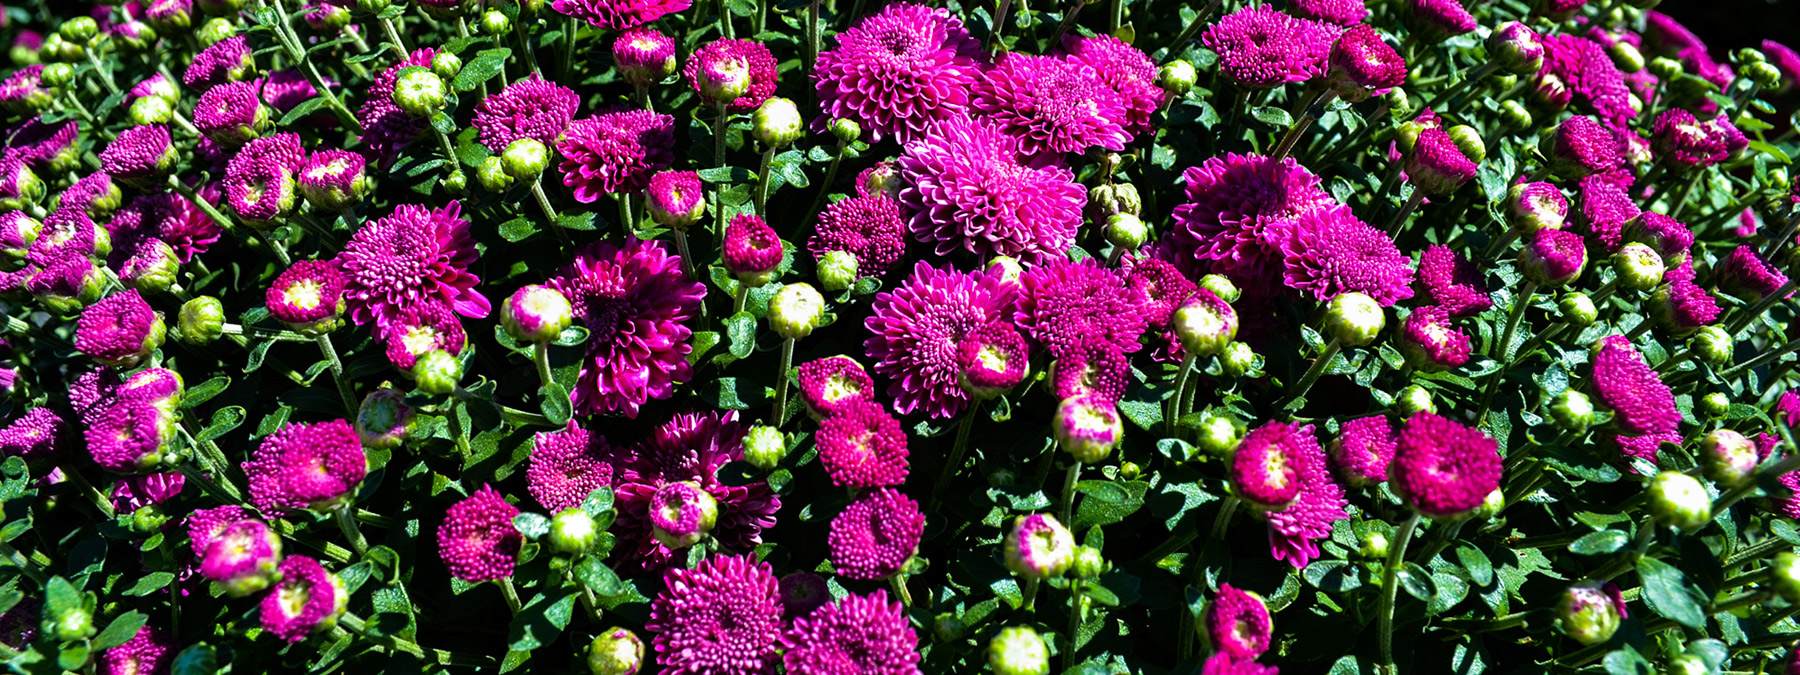 A close up of some purple flowers with green leaves